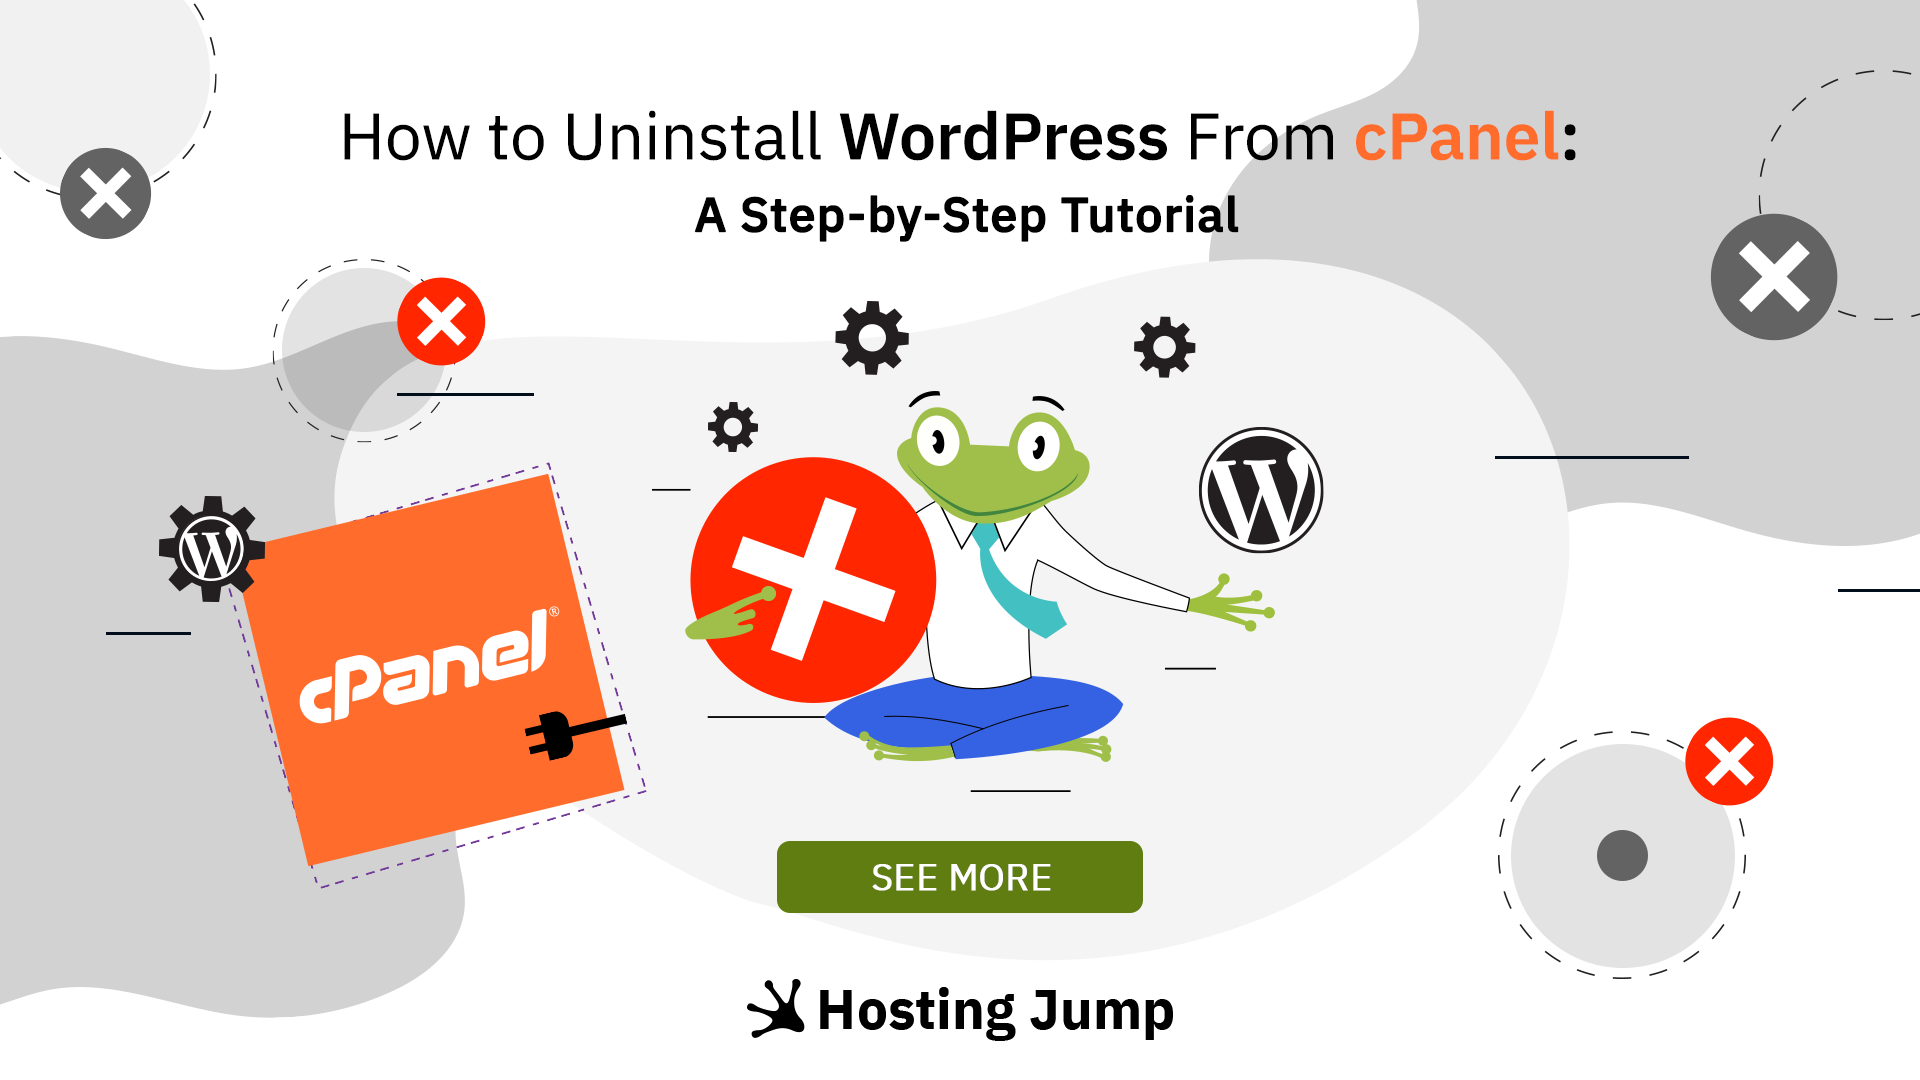 How to Uninstall WordPress From cPanel: A Step-by-Step Tutorial